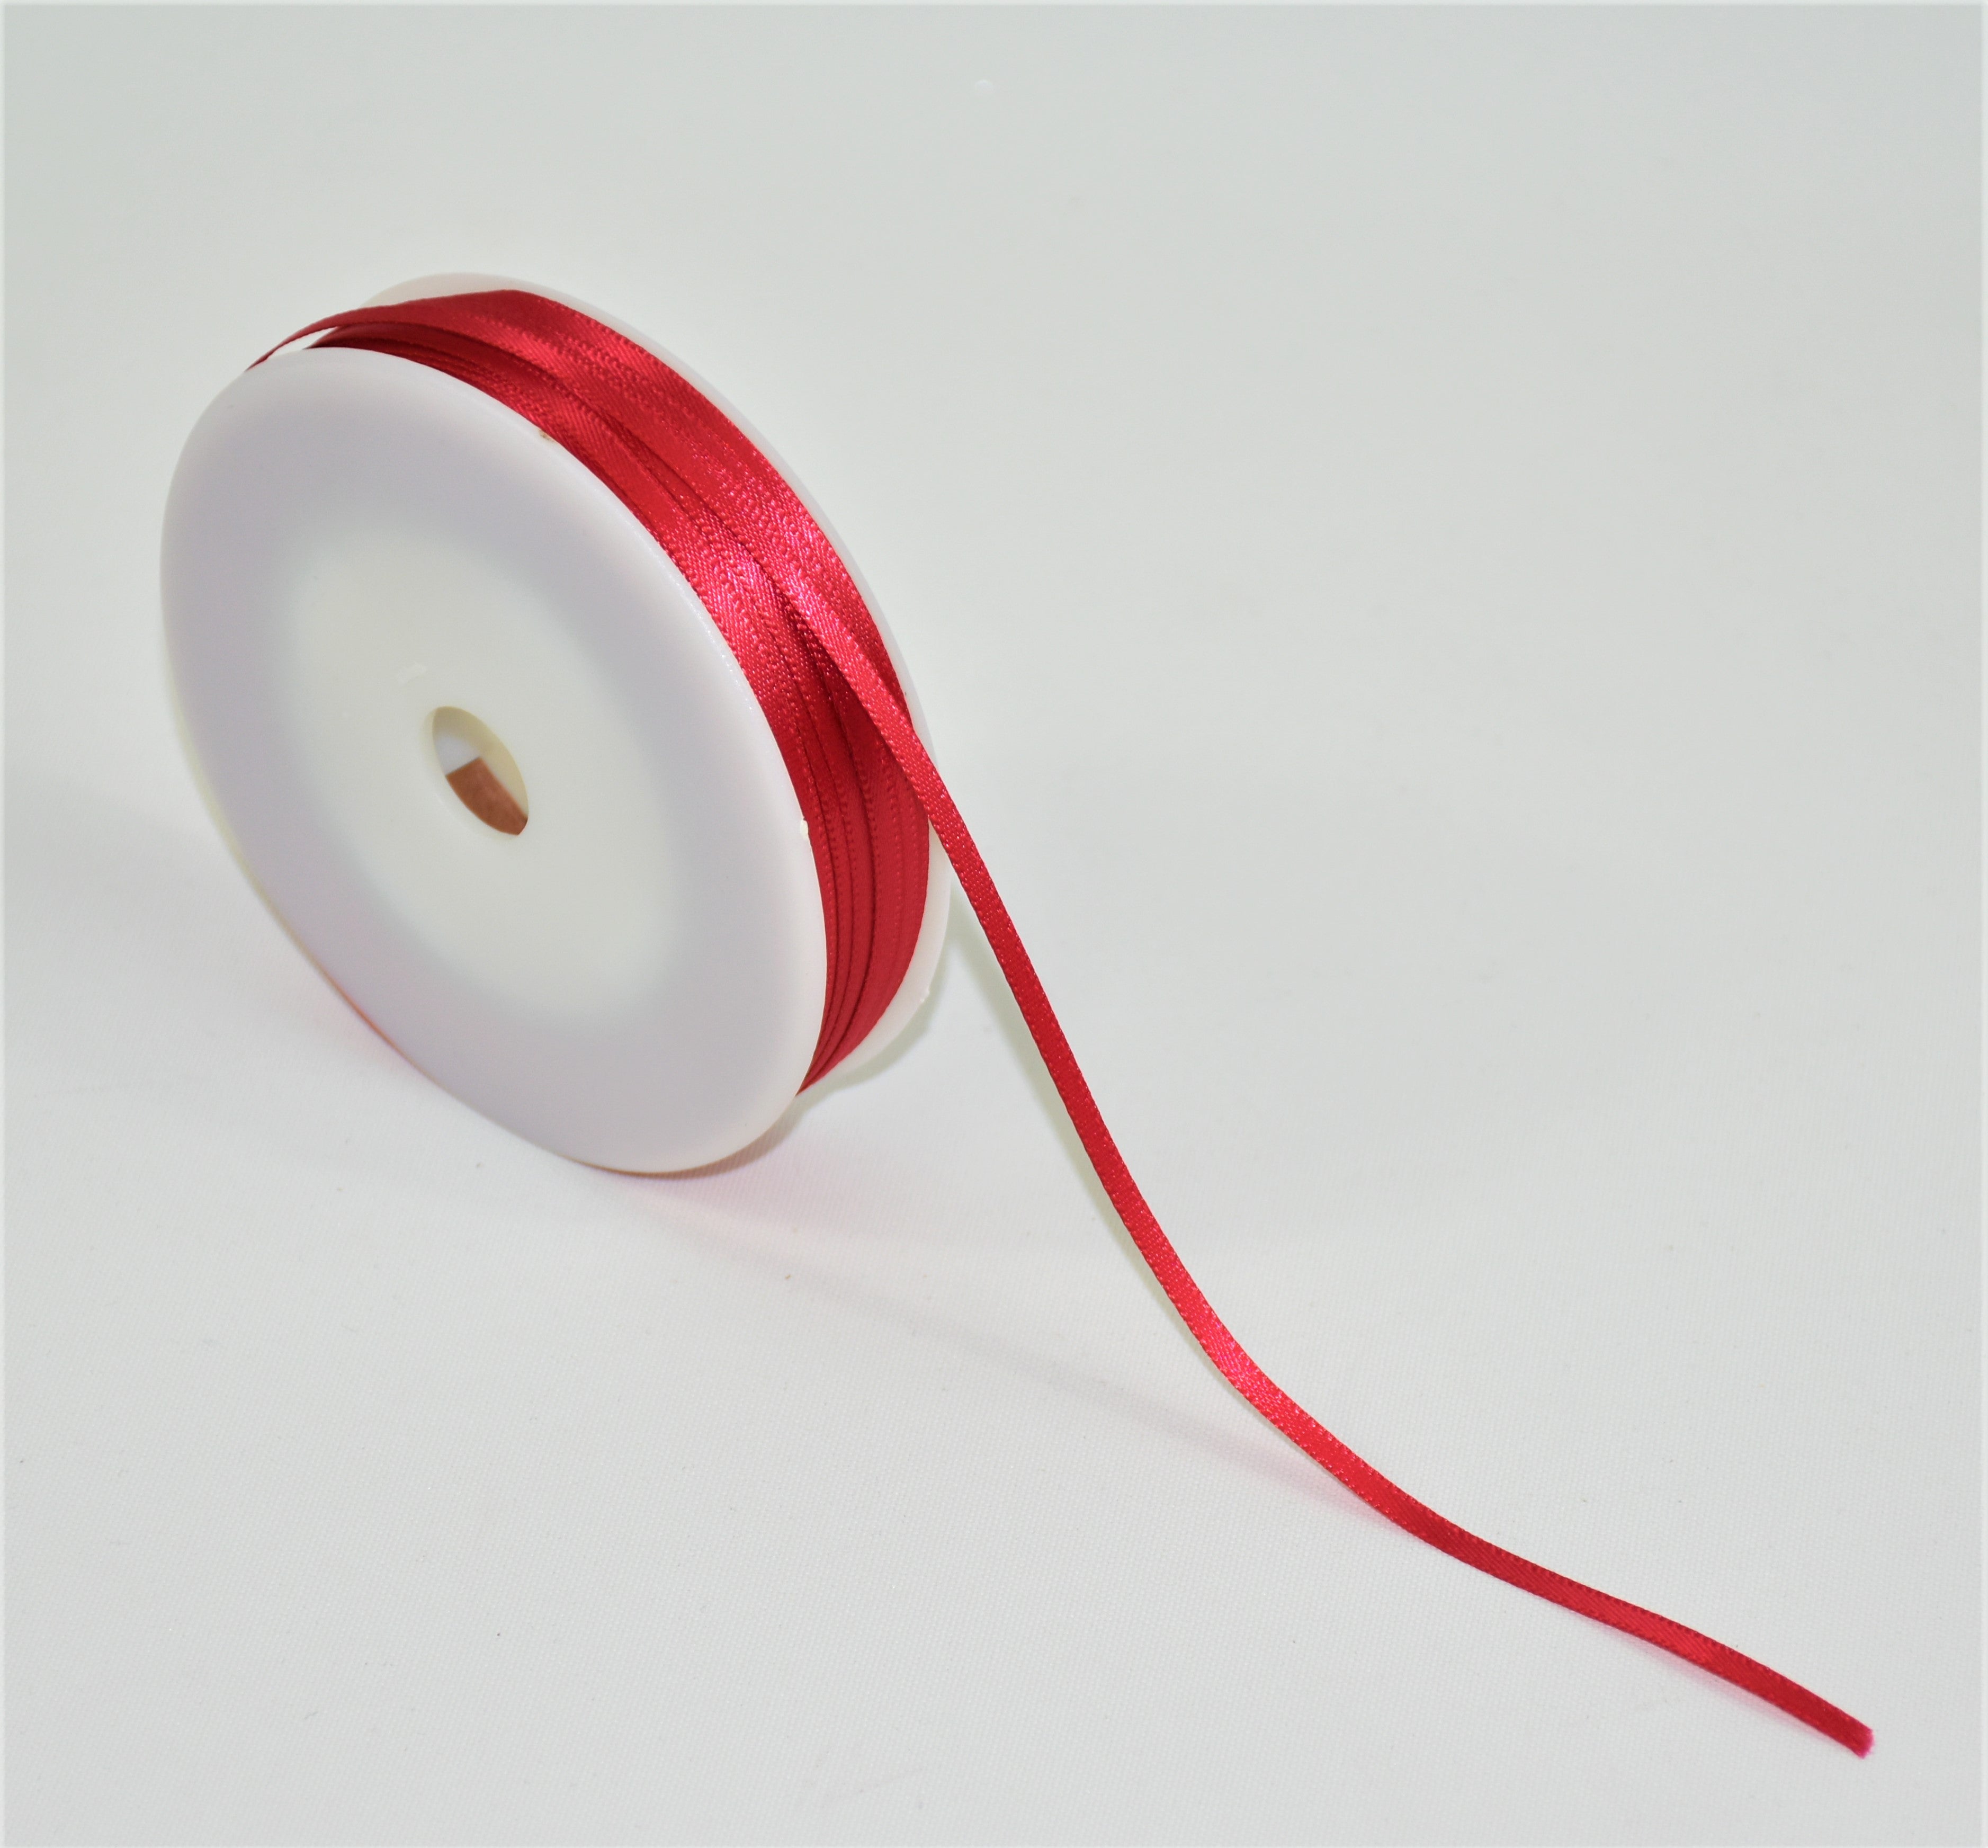 Satin Ribbon - Red - 3mm wide